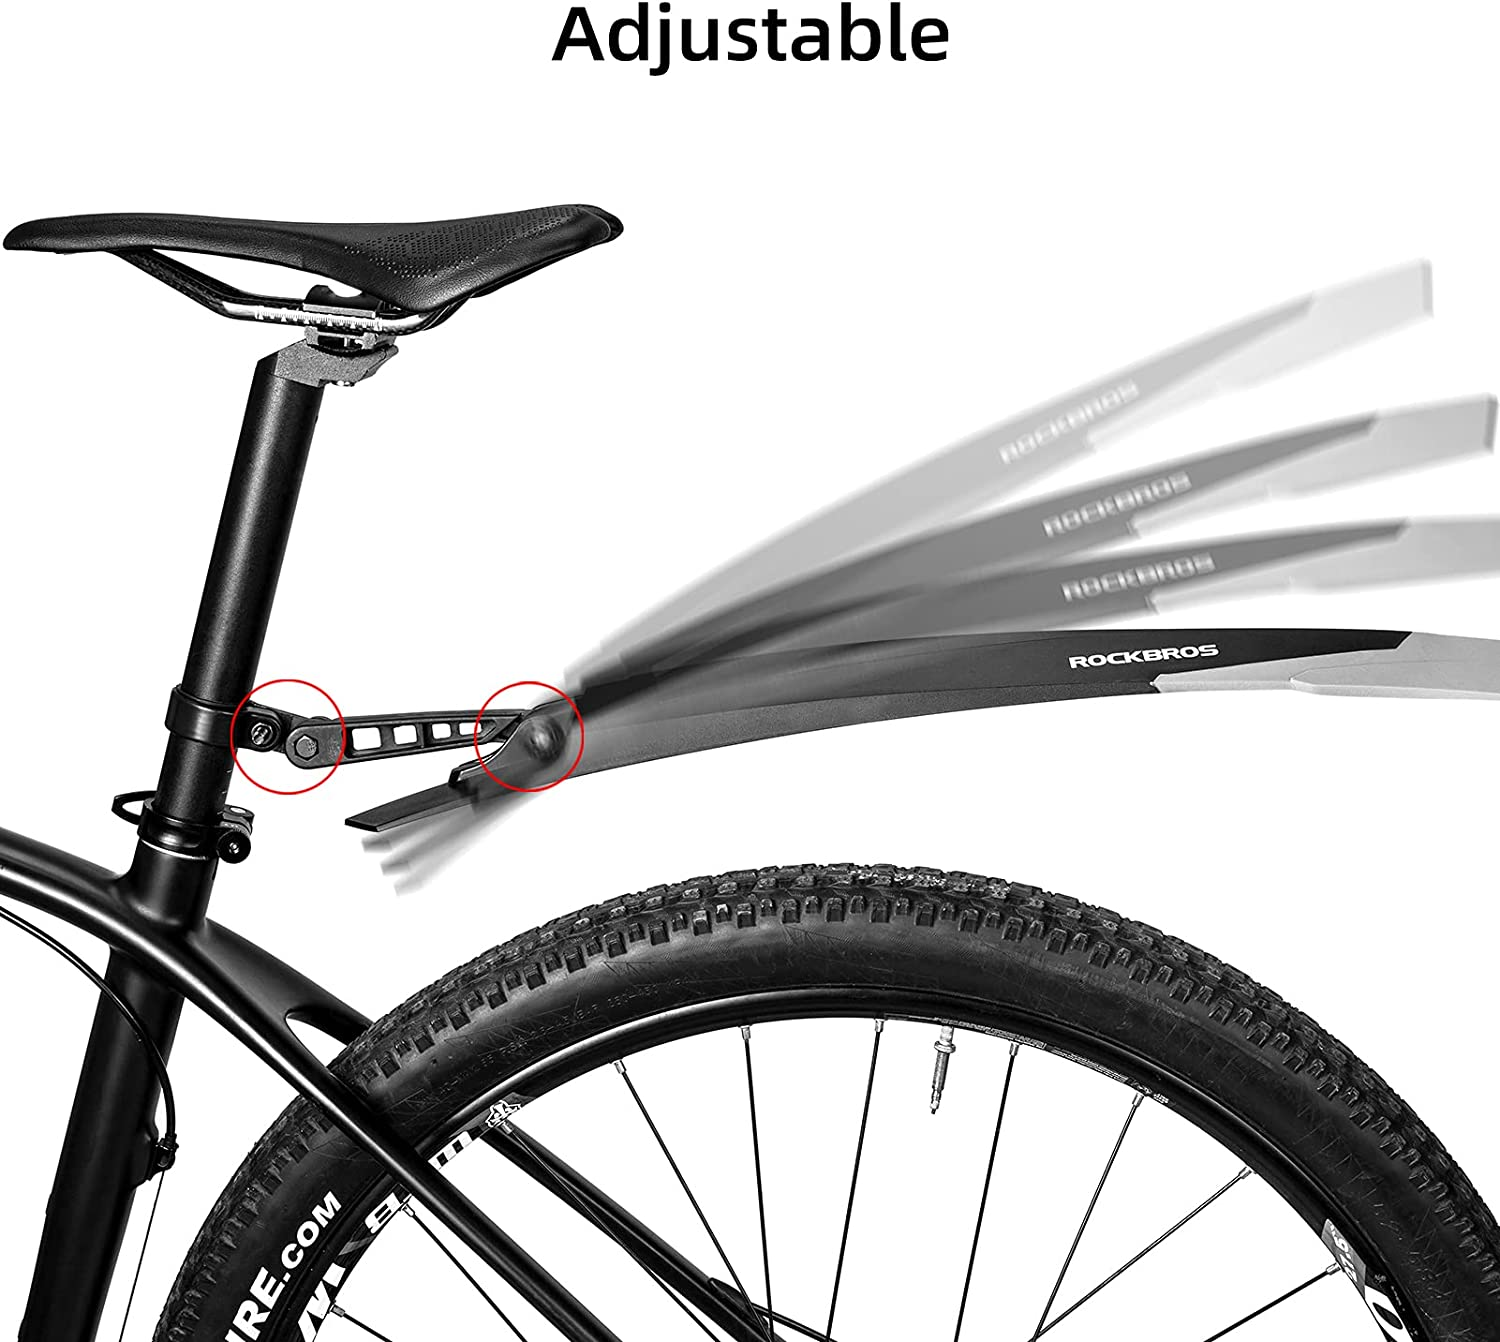 MTB Mudguard - How to install - Front Fender 